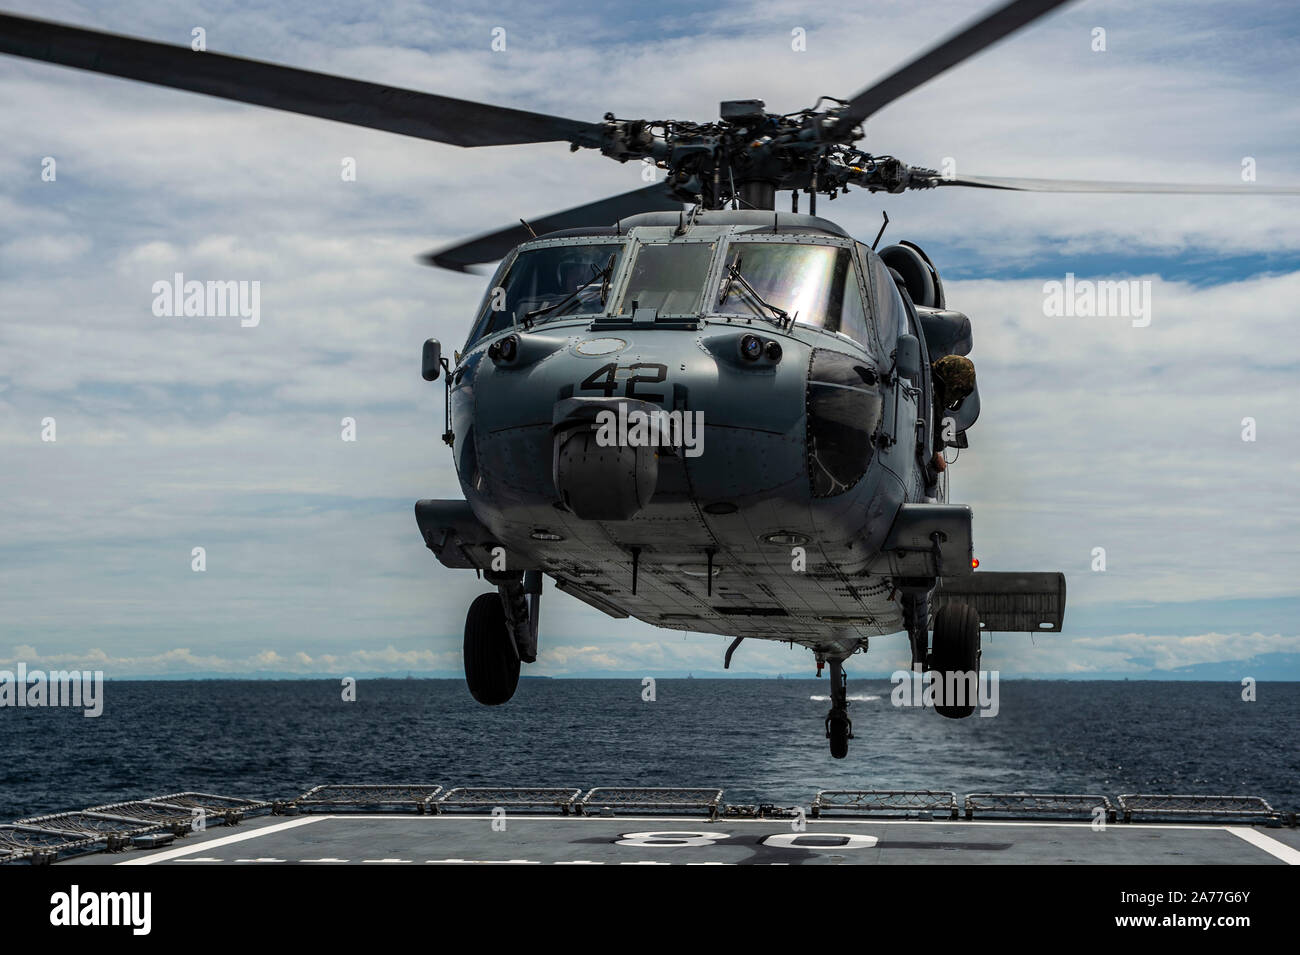 191029-N-FV739-0122  SOUTH CHINA SEA (Oct. 29, 2019) An MH-60S Sea Hawk assigned to the “Wildcards” of Helicopter Sea Combat Squadron (HSC) 23 lands on the flight deck of Royal Brunei Navy offshore patrol vessel KDB Darulaman (DMN 8) during a deck landing exercise in support of Cooperation Afloat Readiness and Training (CARAT) Brunei. This year marks the 25th iteration of CARAT, a multinational exercise designed to enhance U.S. and partner navies' abilities to operate together in response to traditional and non-traditional maritime security challenges in the Indo-Pacific region. (U.S. Navy pho Stock Photo